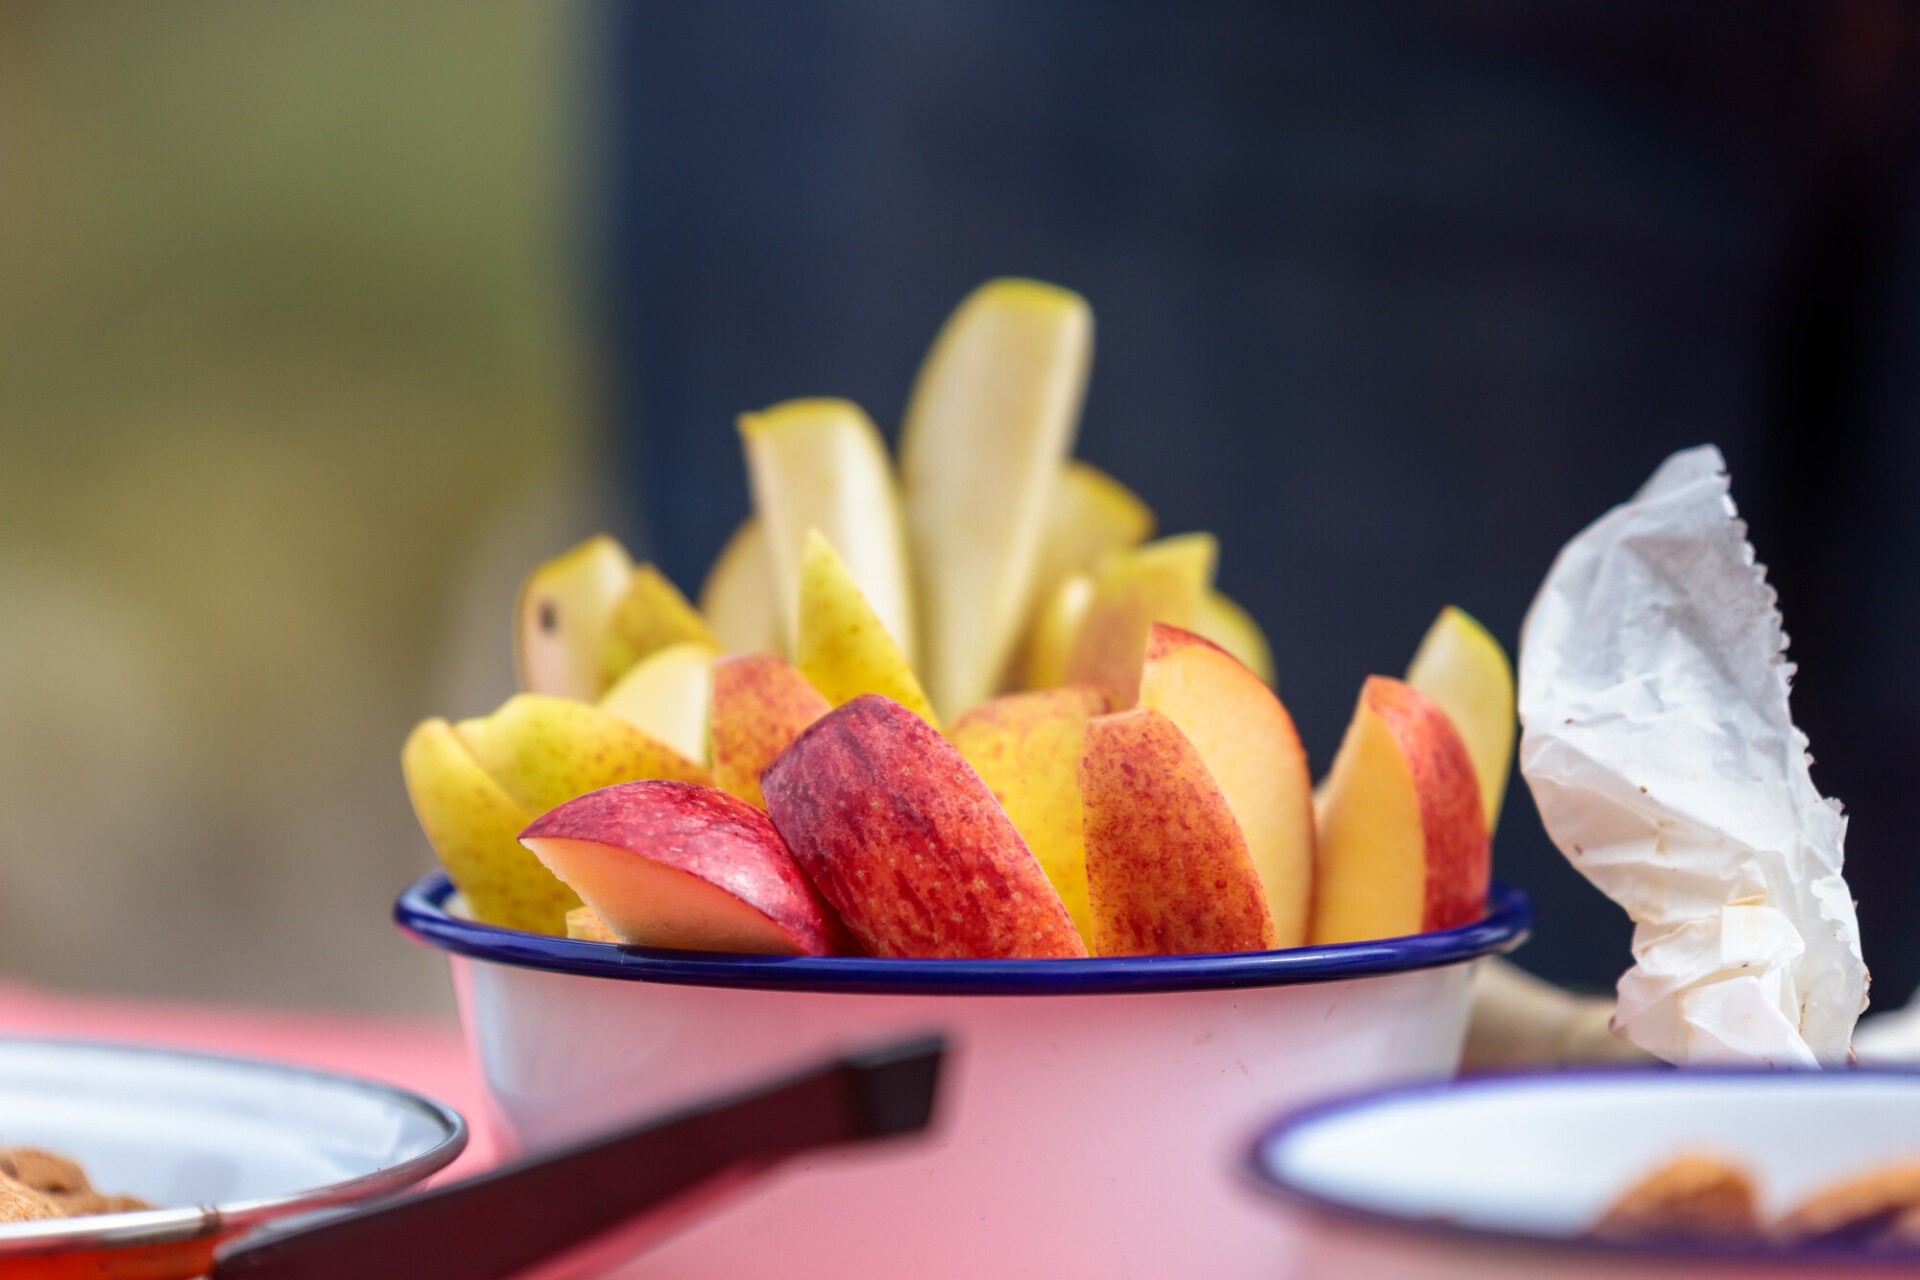 Fresh and Juicy: Sliced Apple Pieces in a Tempting Bowl